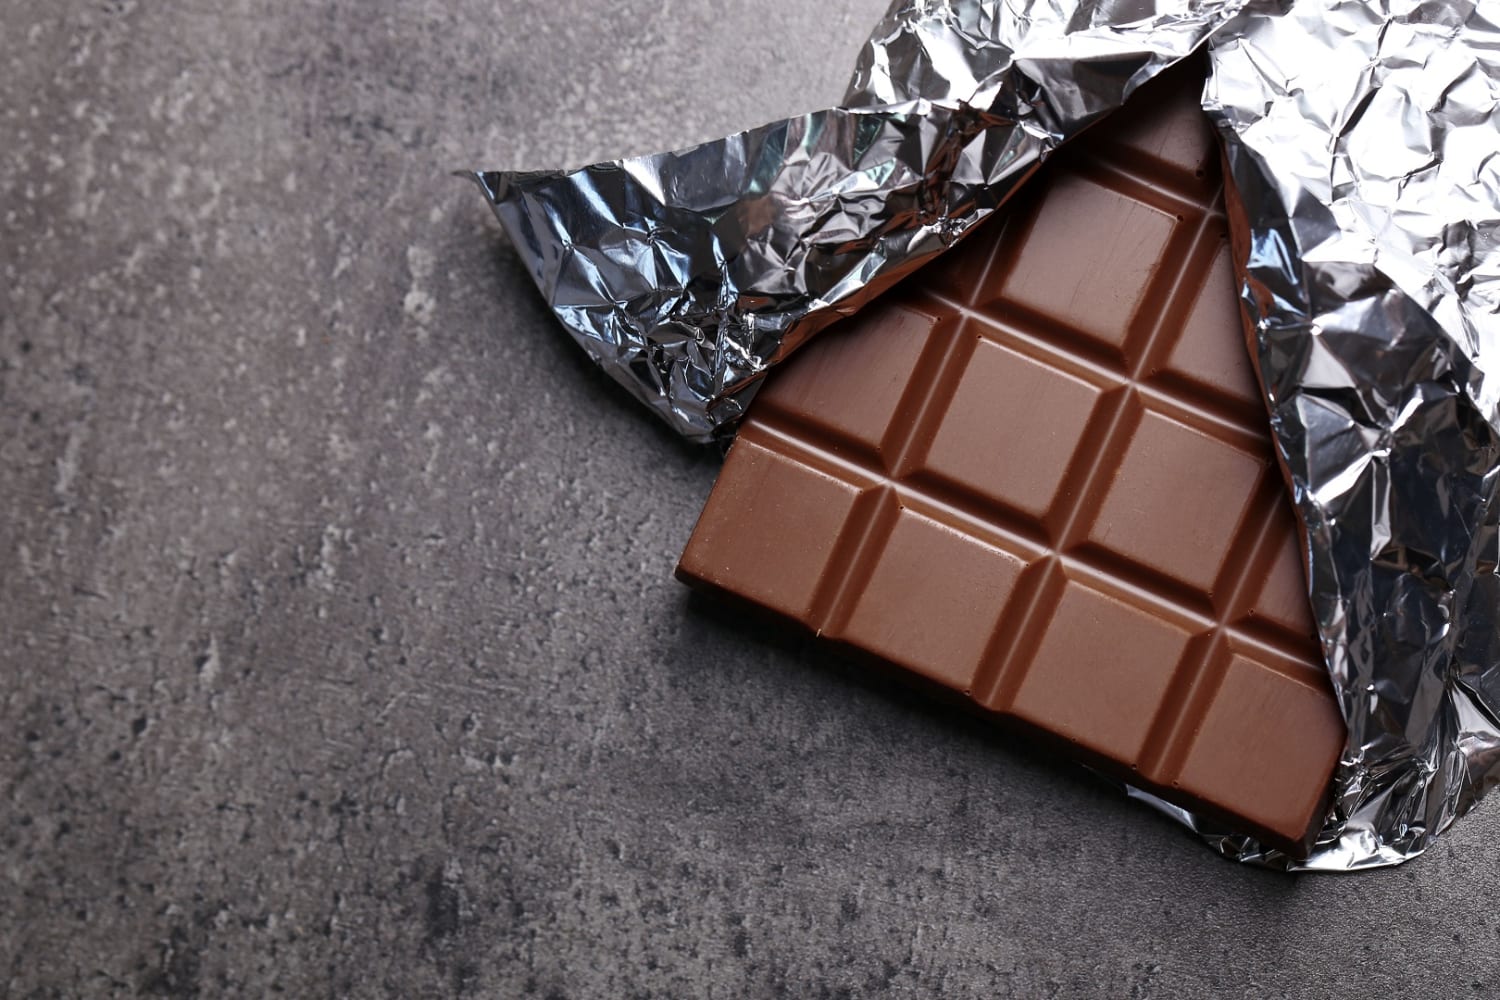 Chocolate Fights Coughs Better Than Codeine, Says Science